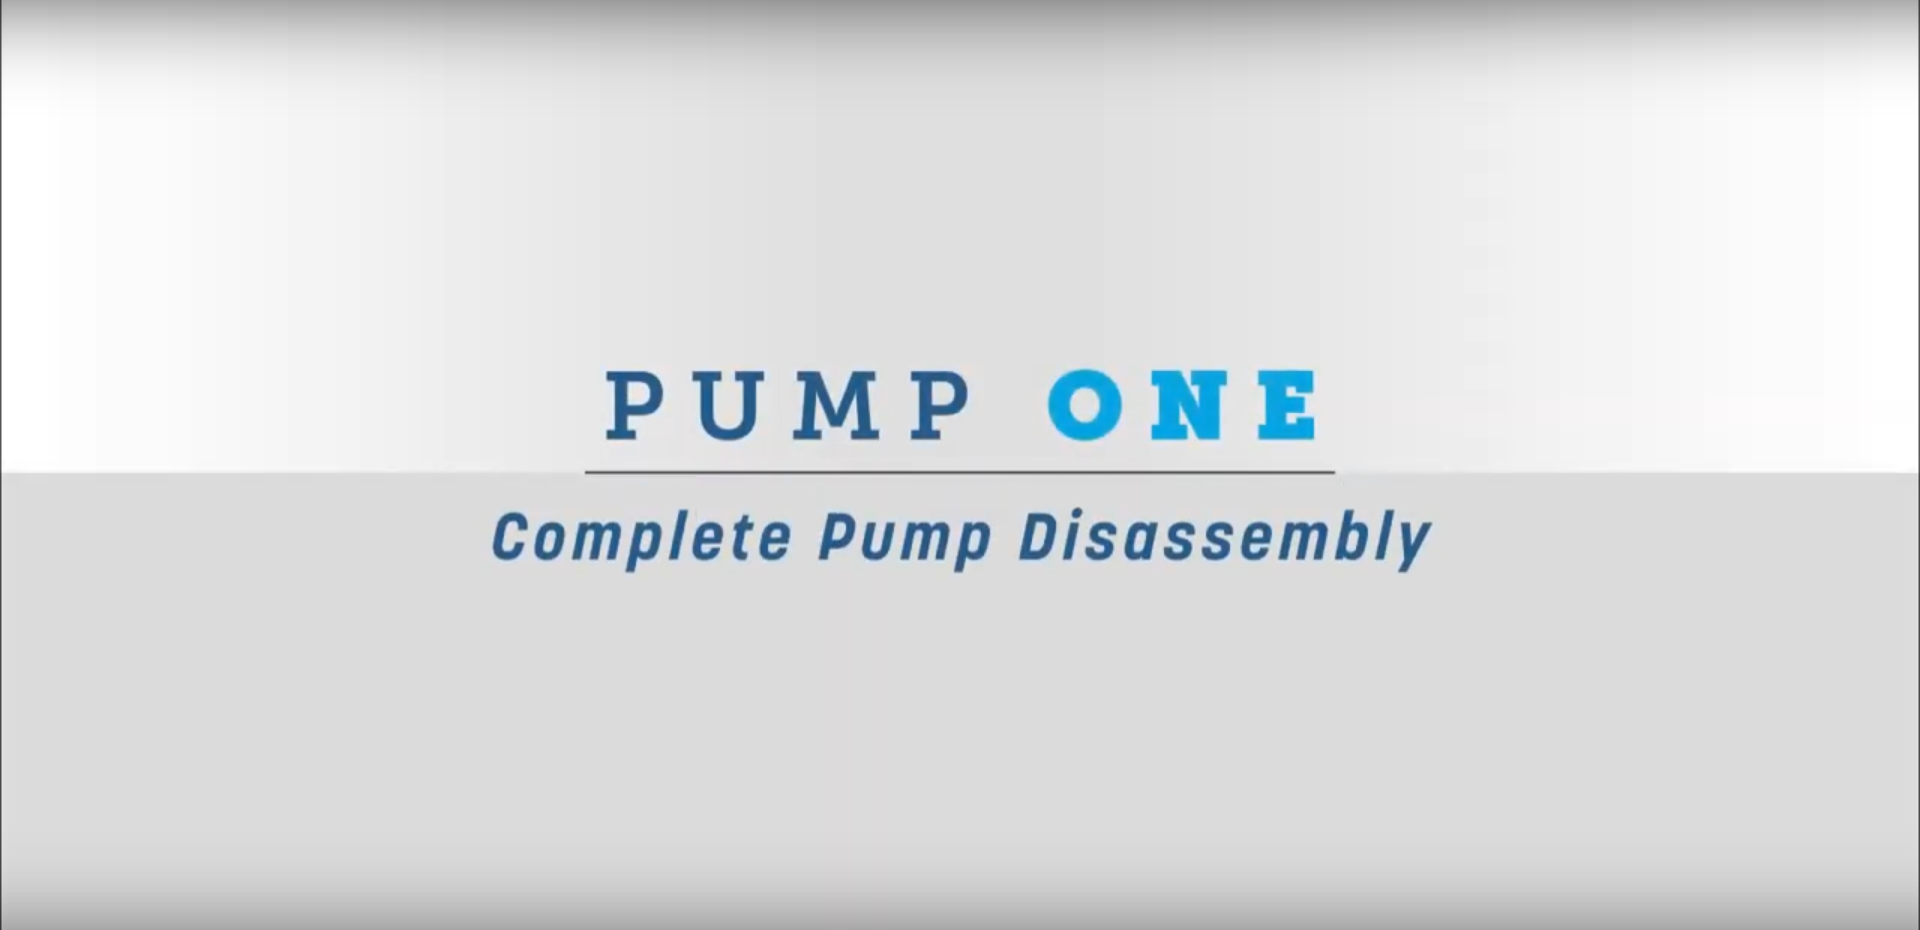 Complete Pump Disassembly